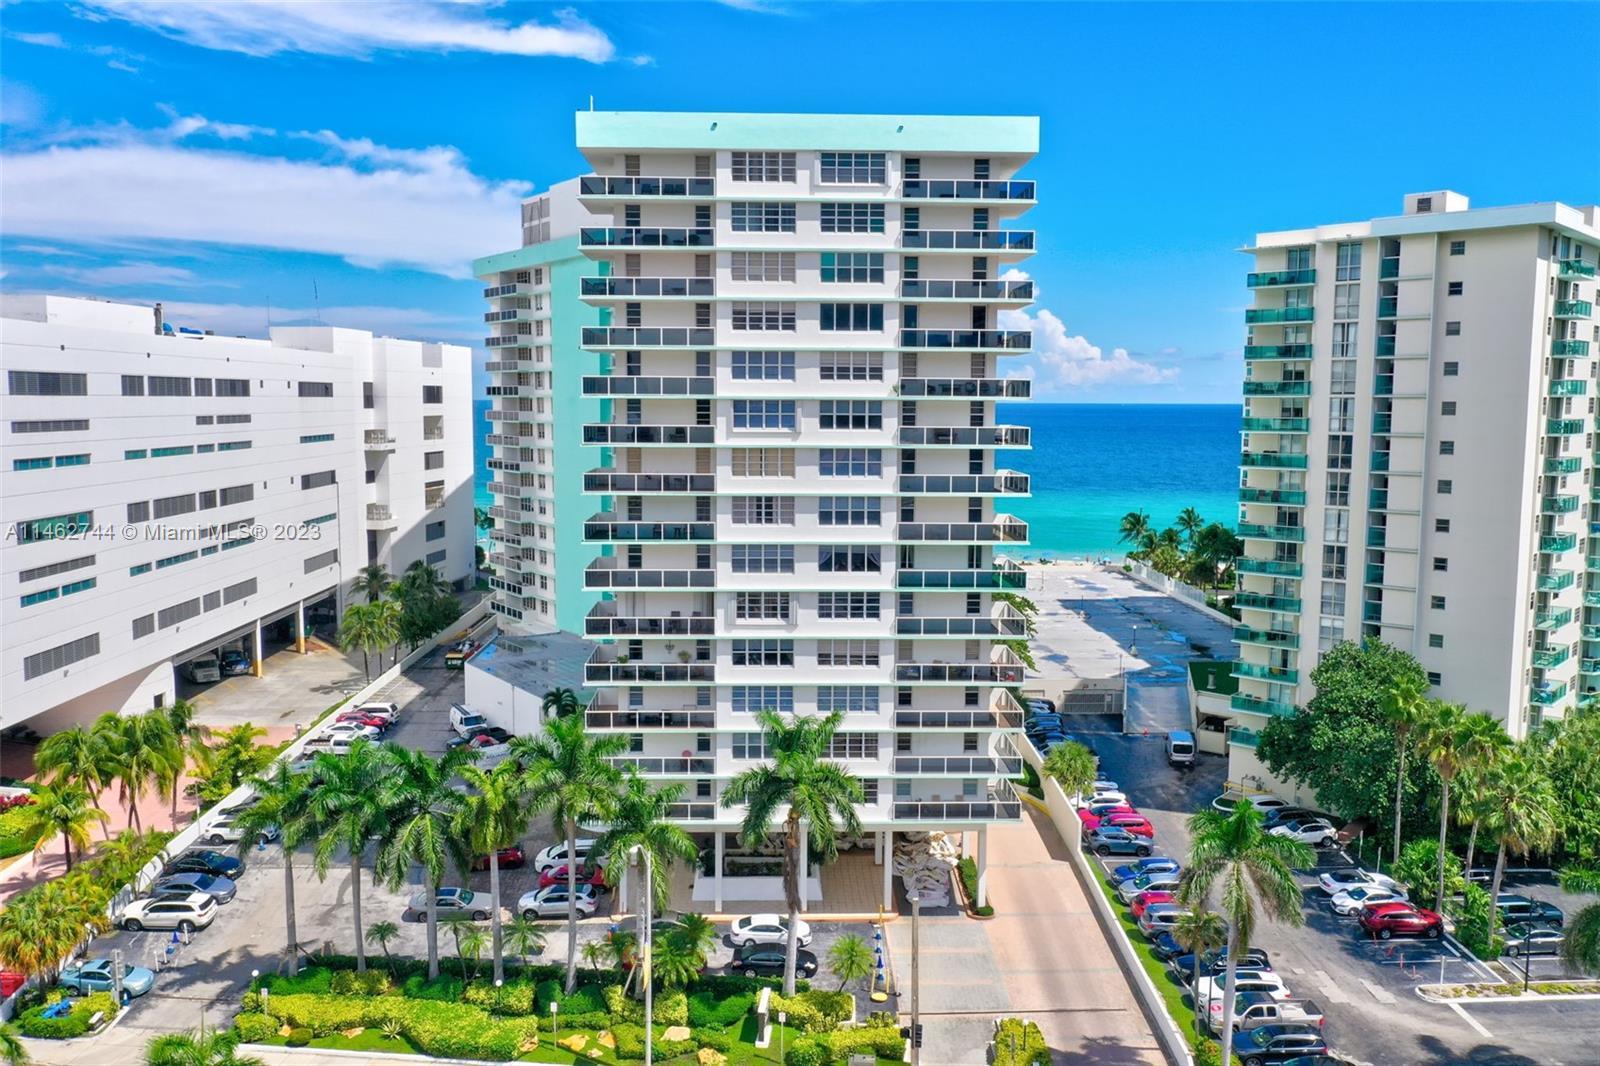 Impeccable, Pristine and Gorgeous 1/1 Condo situated ON the BEACH! This Luxurious condominium is sol